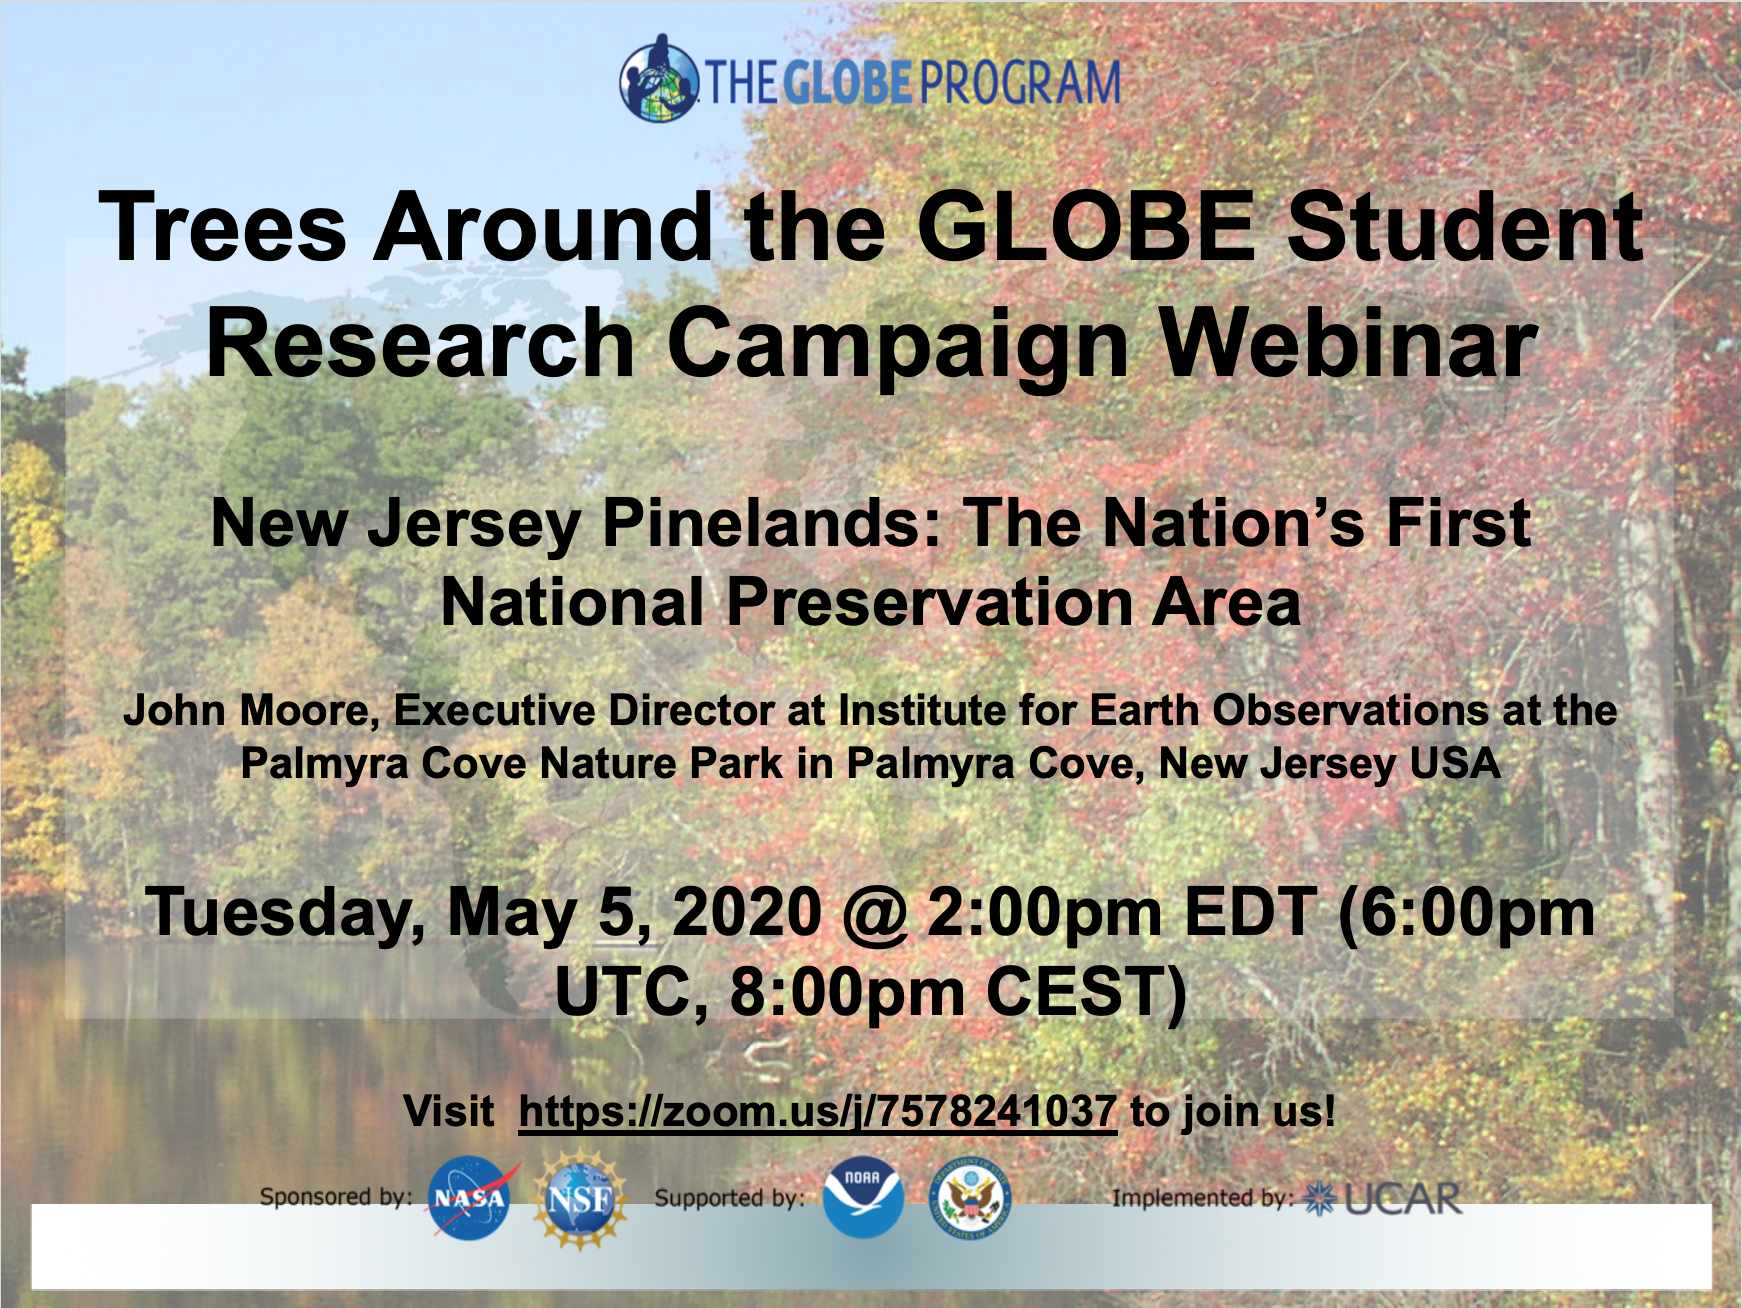 Trees Around the GLOBE Student Research Campaign 05 May 2020 webinar shareable